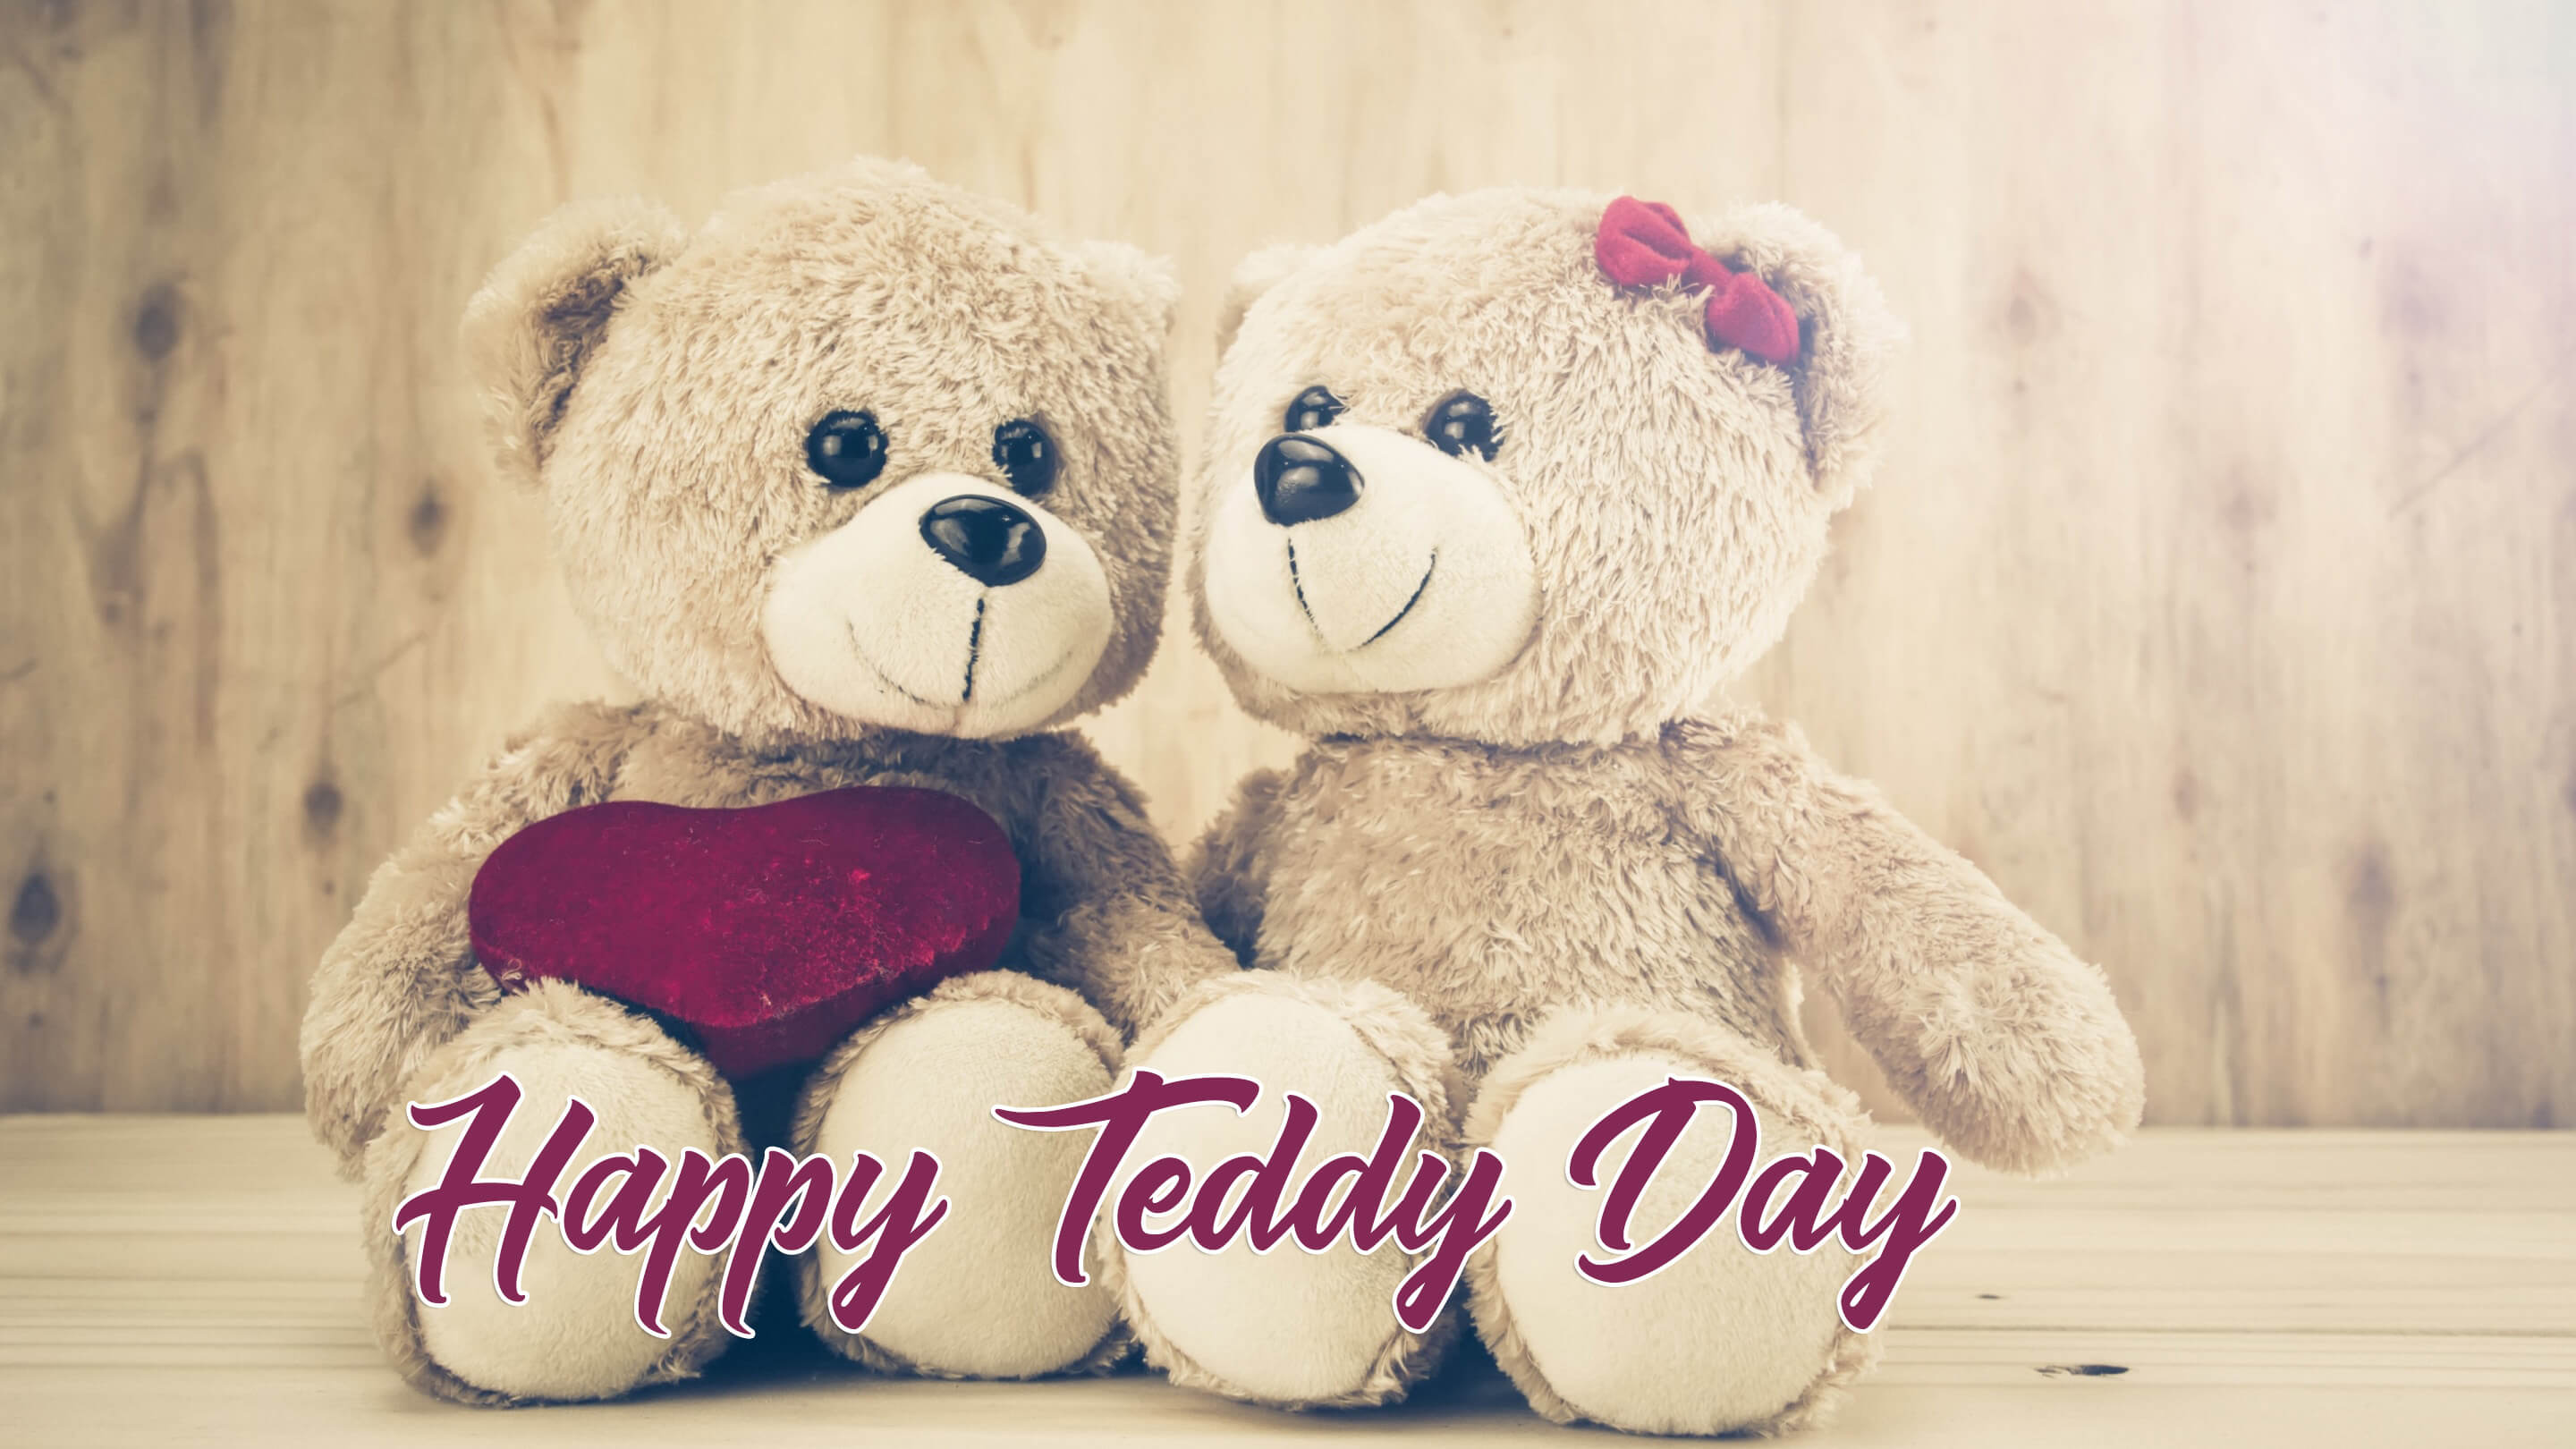 Happy Teddy Day Wishes Bear Couples Image Large Background Hd Wallpaper